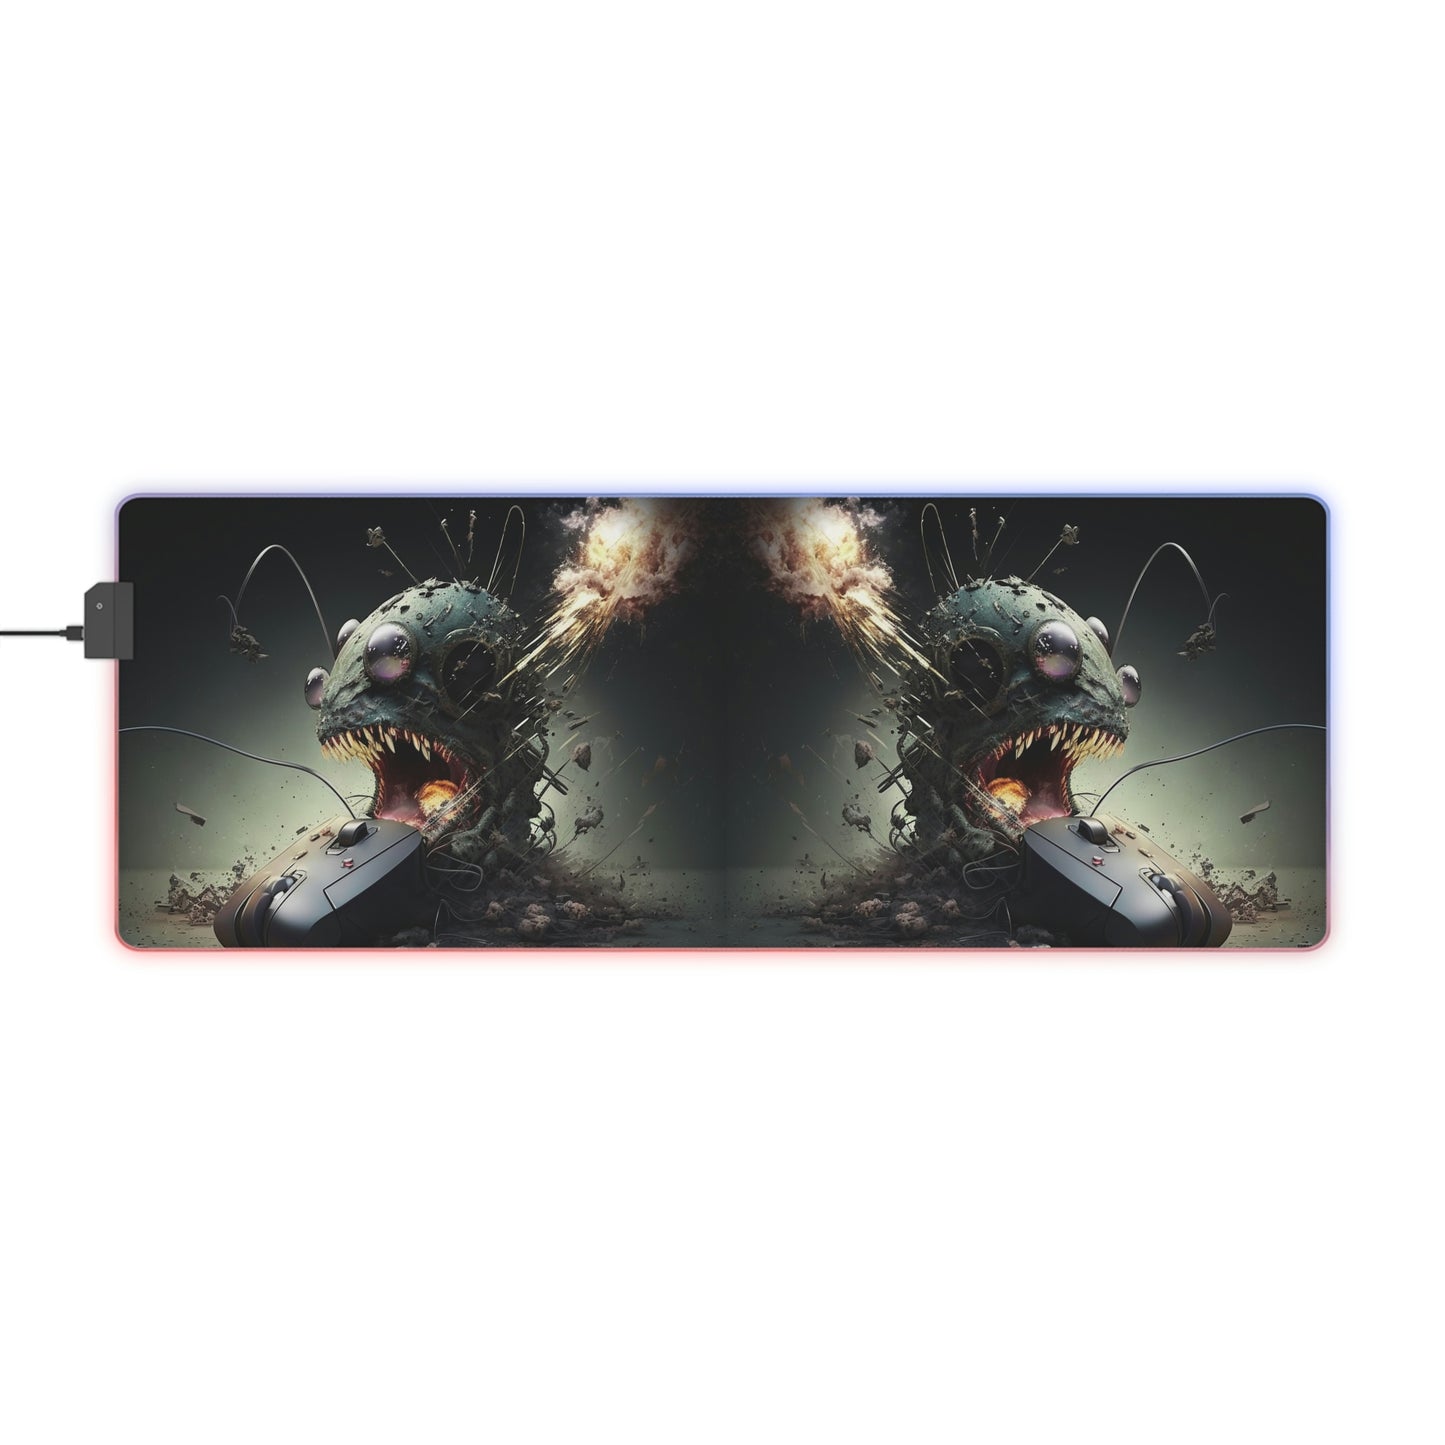 LED Gaming Mouse Pad Mouse Attack 3